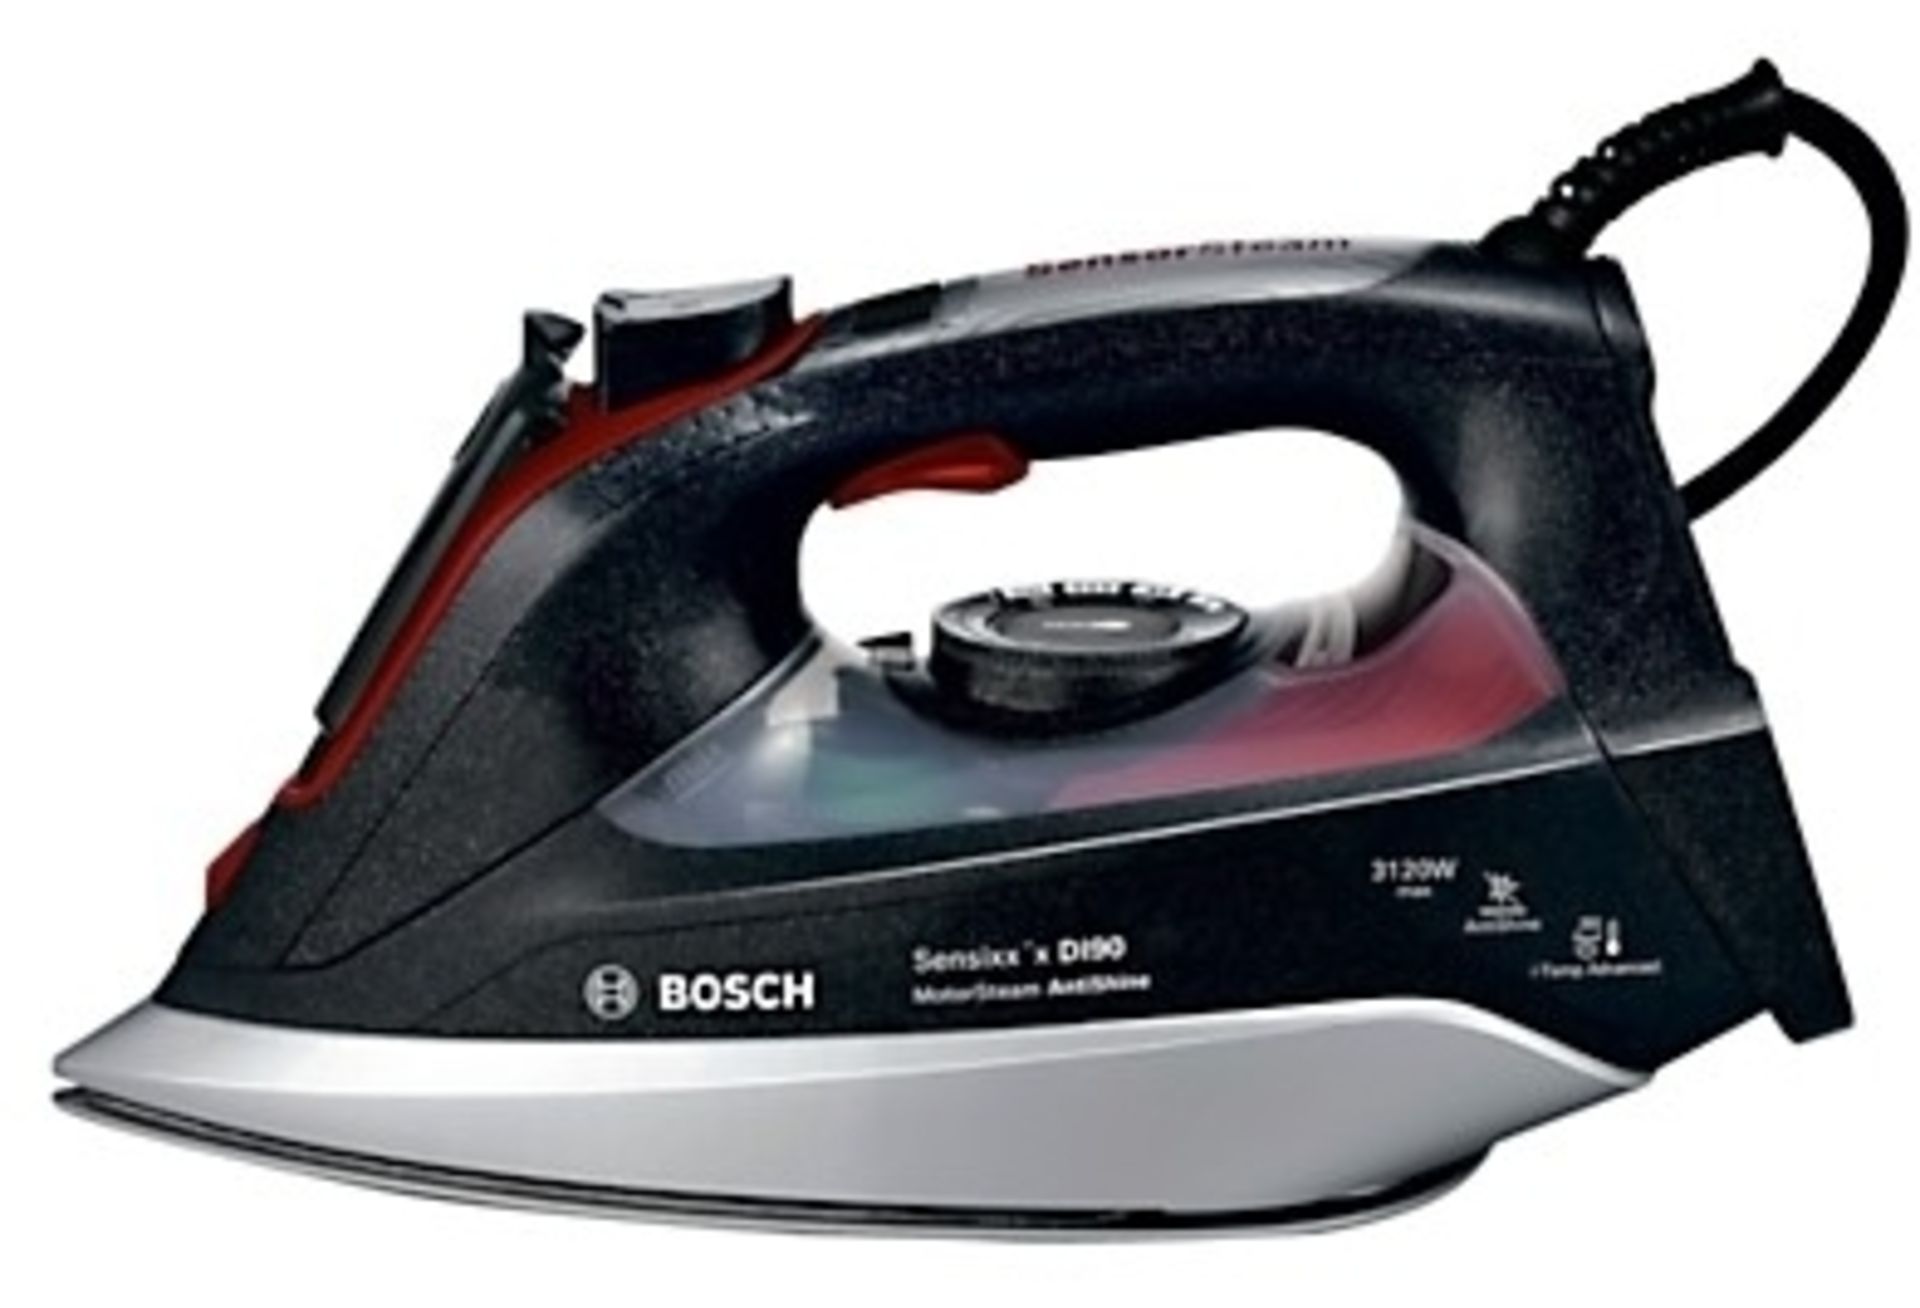 V Grade A/B Bosch Steam Iron TDI9020 Ceramic Soleplate RRP79.99 Colour May Vary